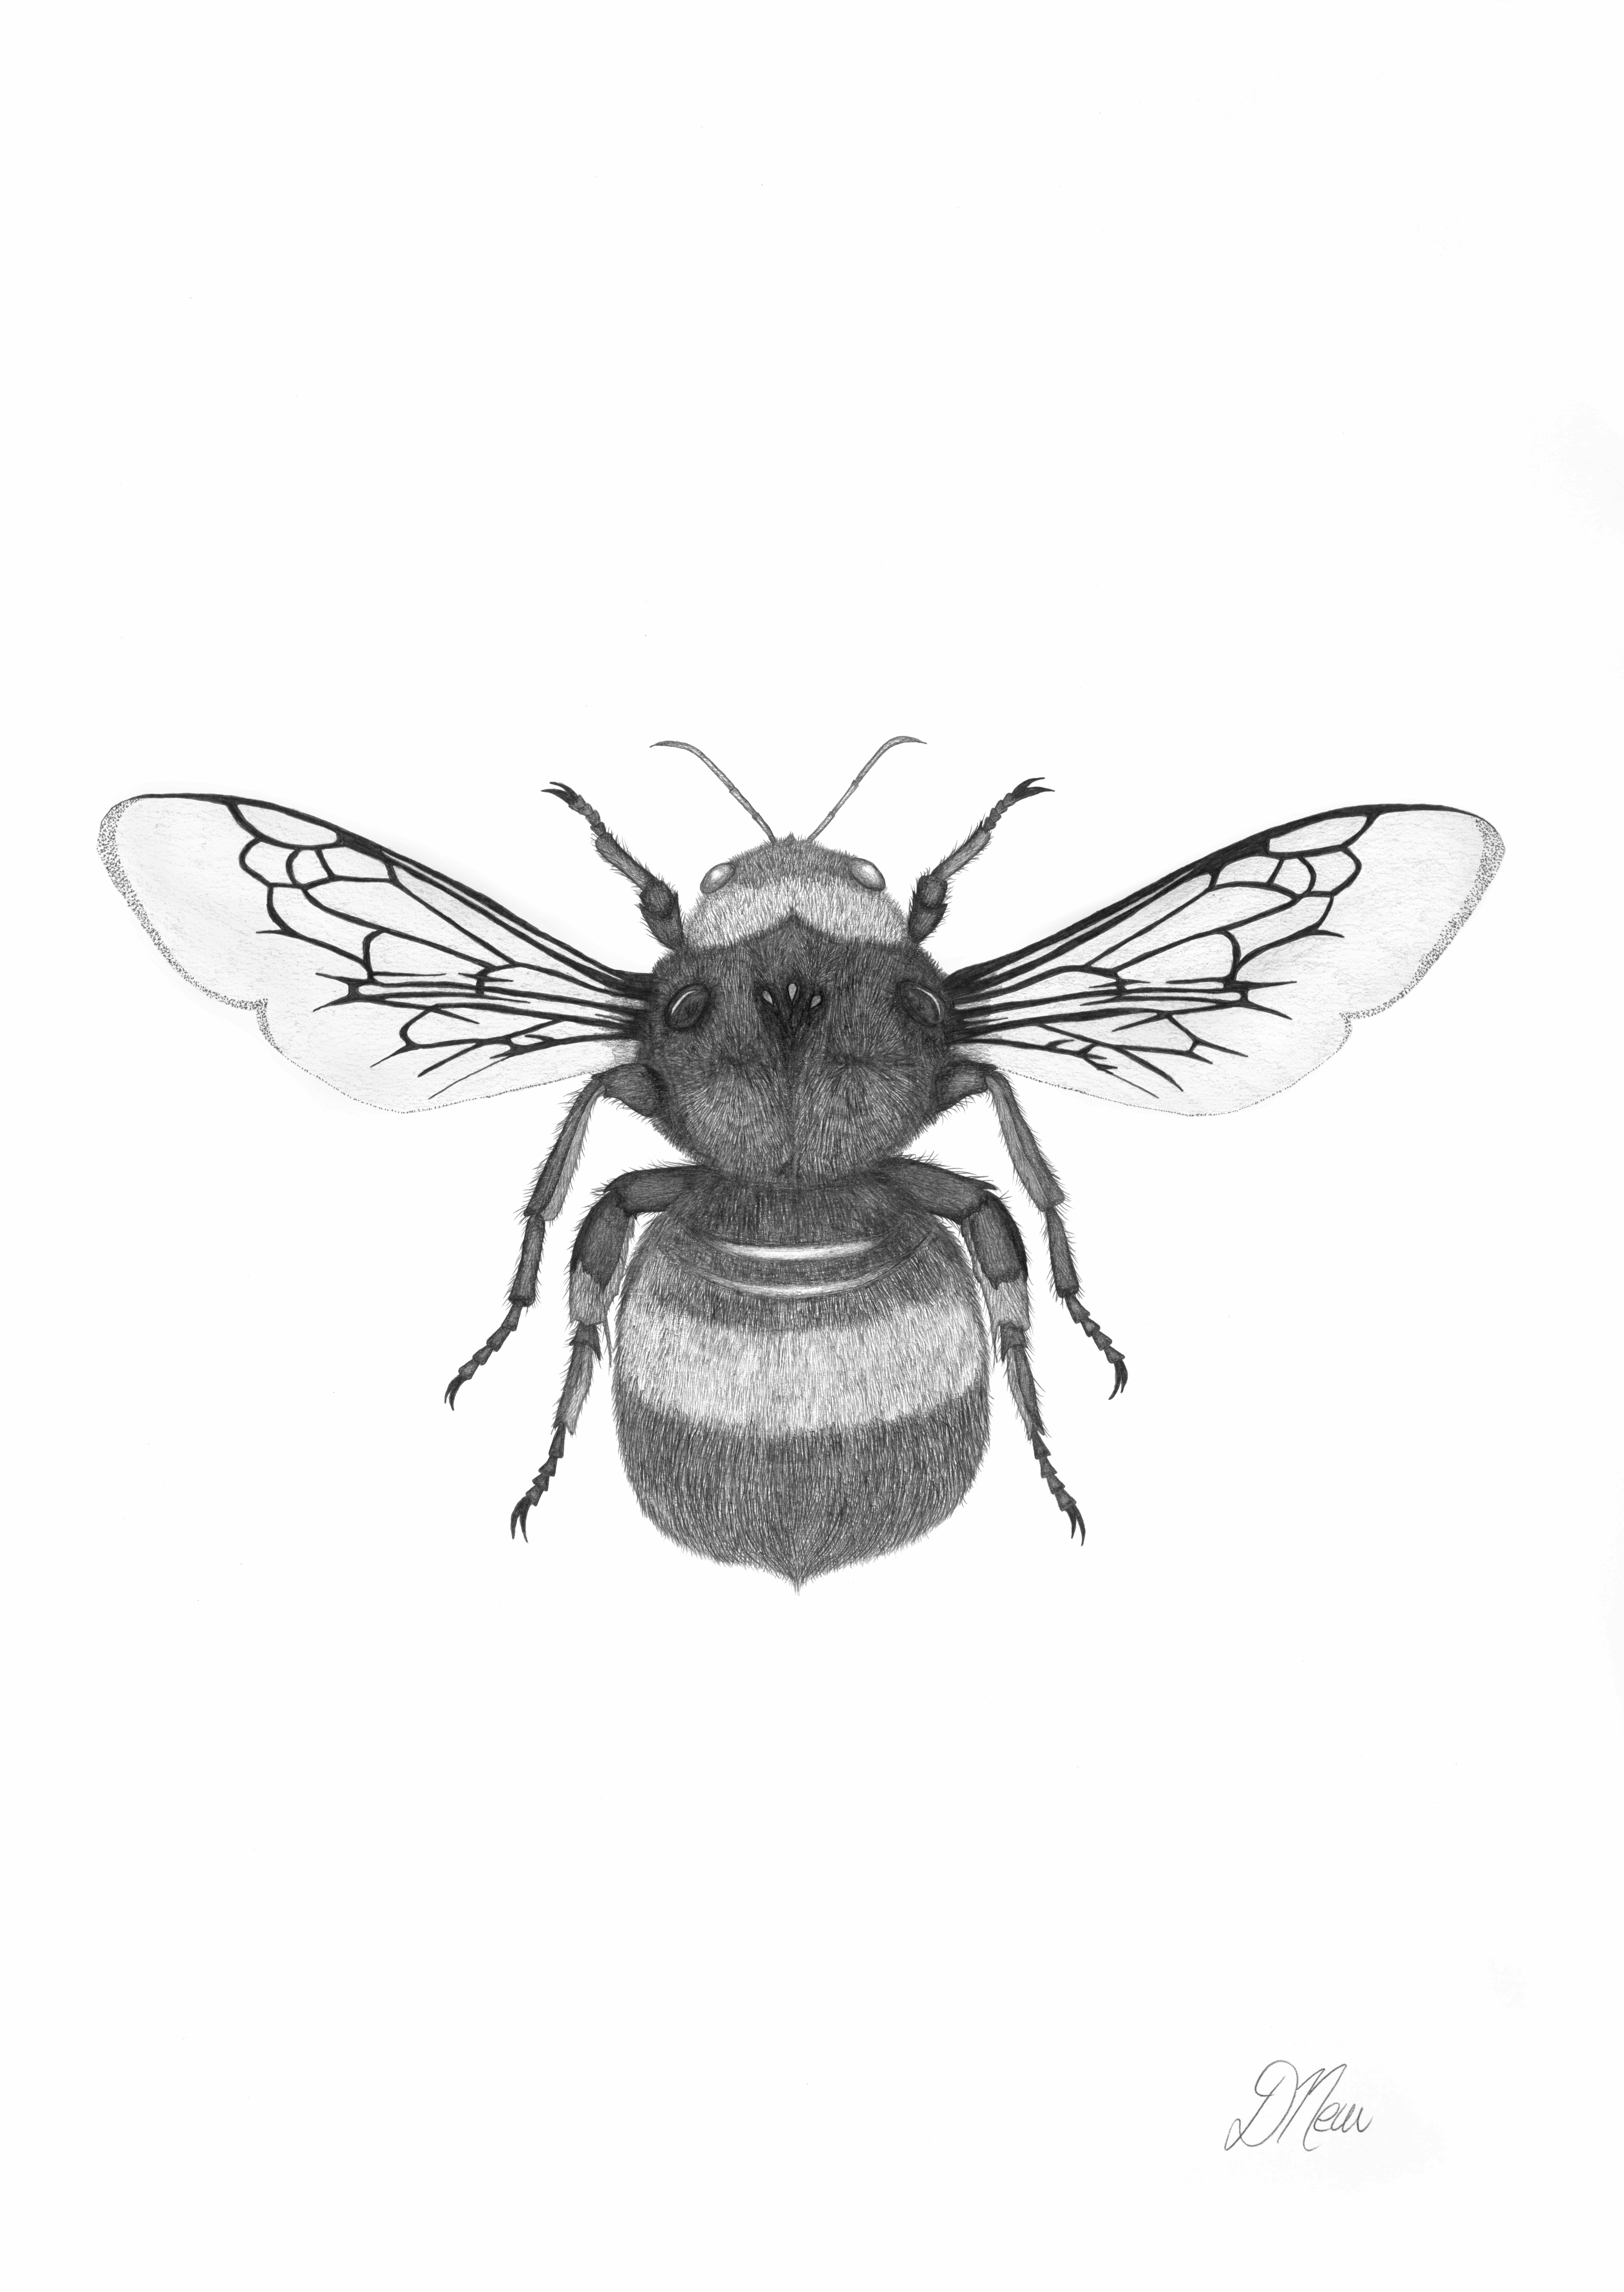 Bumble Bee | Pencil Drawing by Debbie New